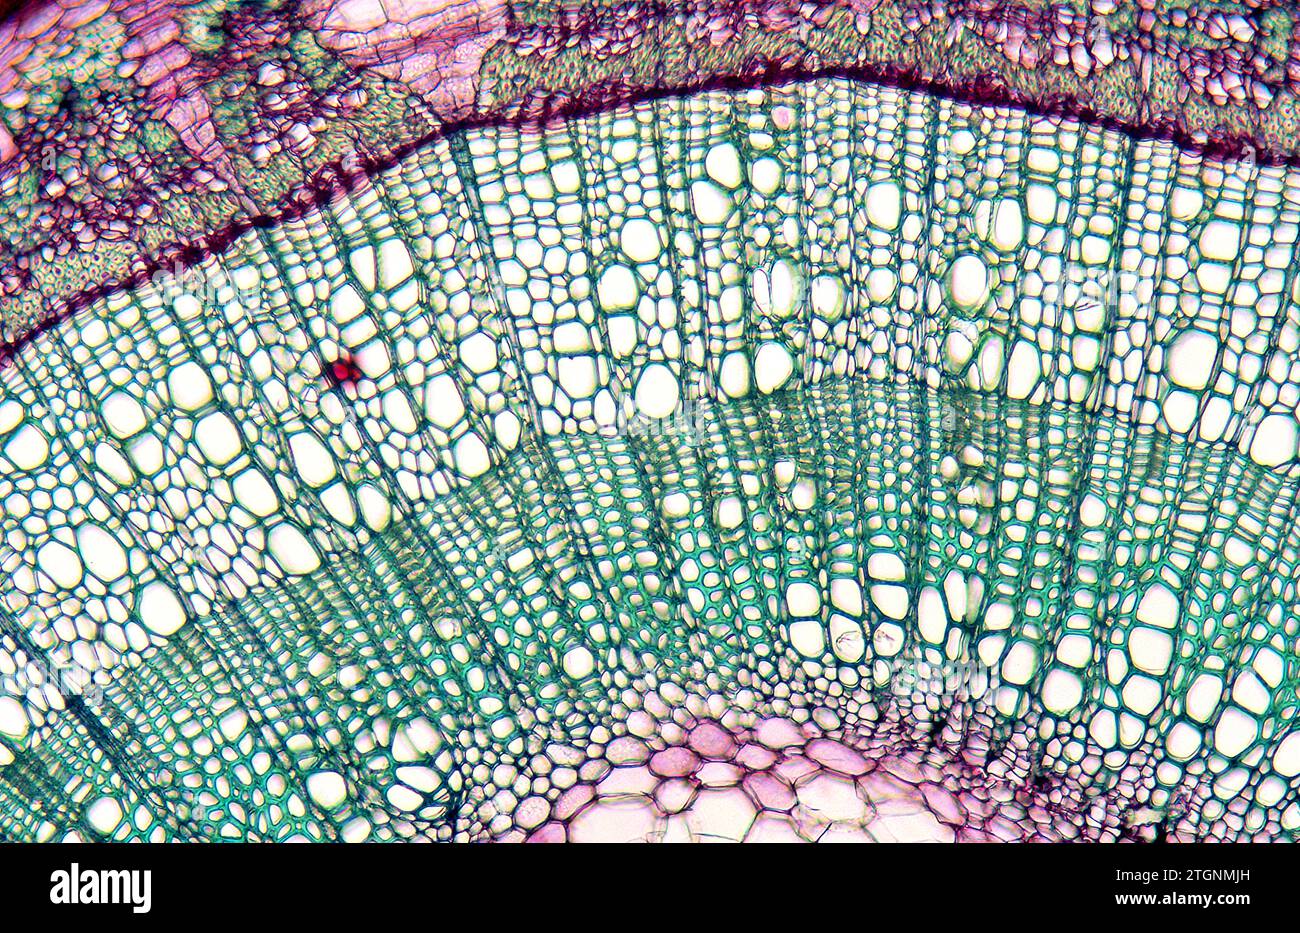 Stem two years old, cross section, showing spring and summer vessels. Photomicrograph. Stock Photo